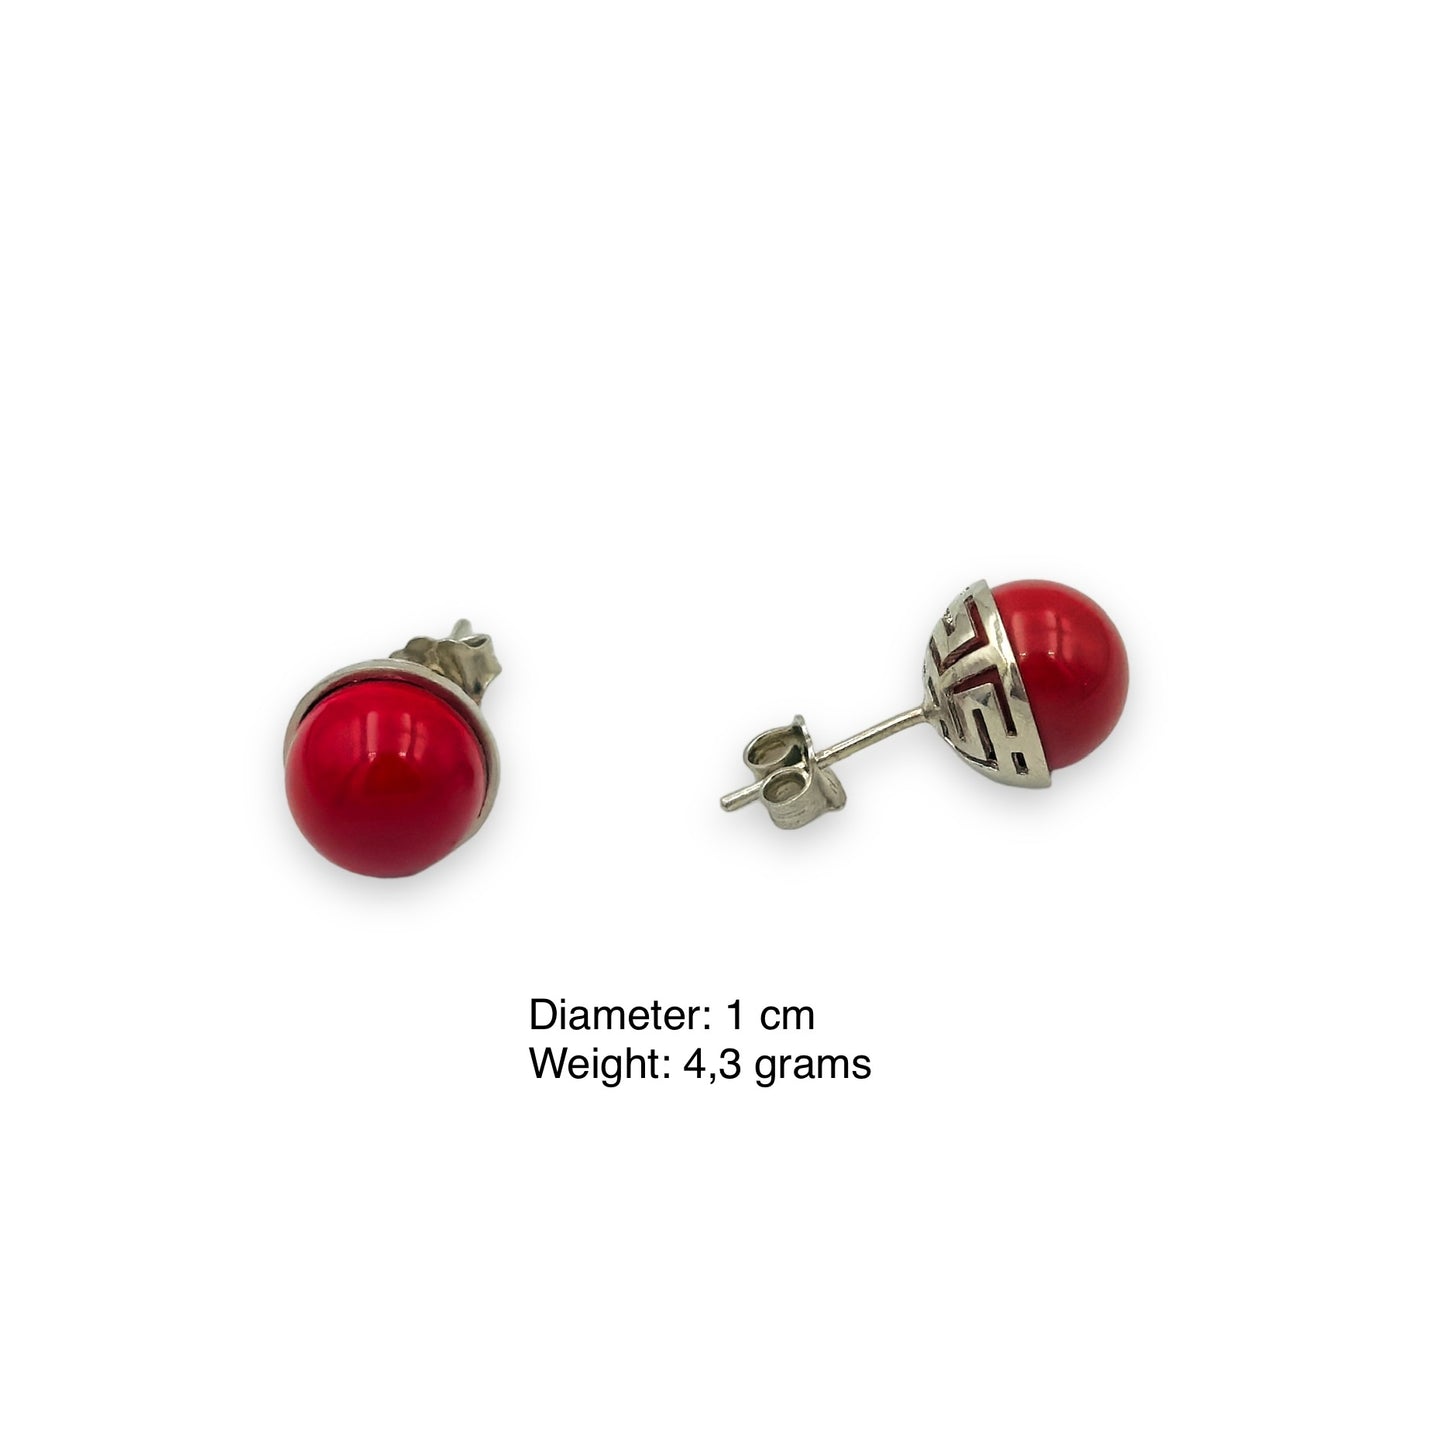 Silver Meander design earrings with red Coral stones